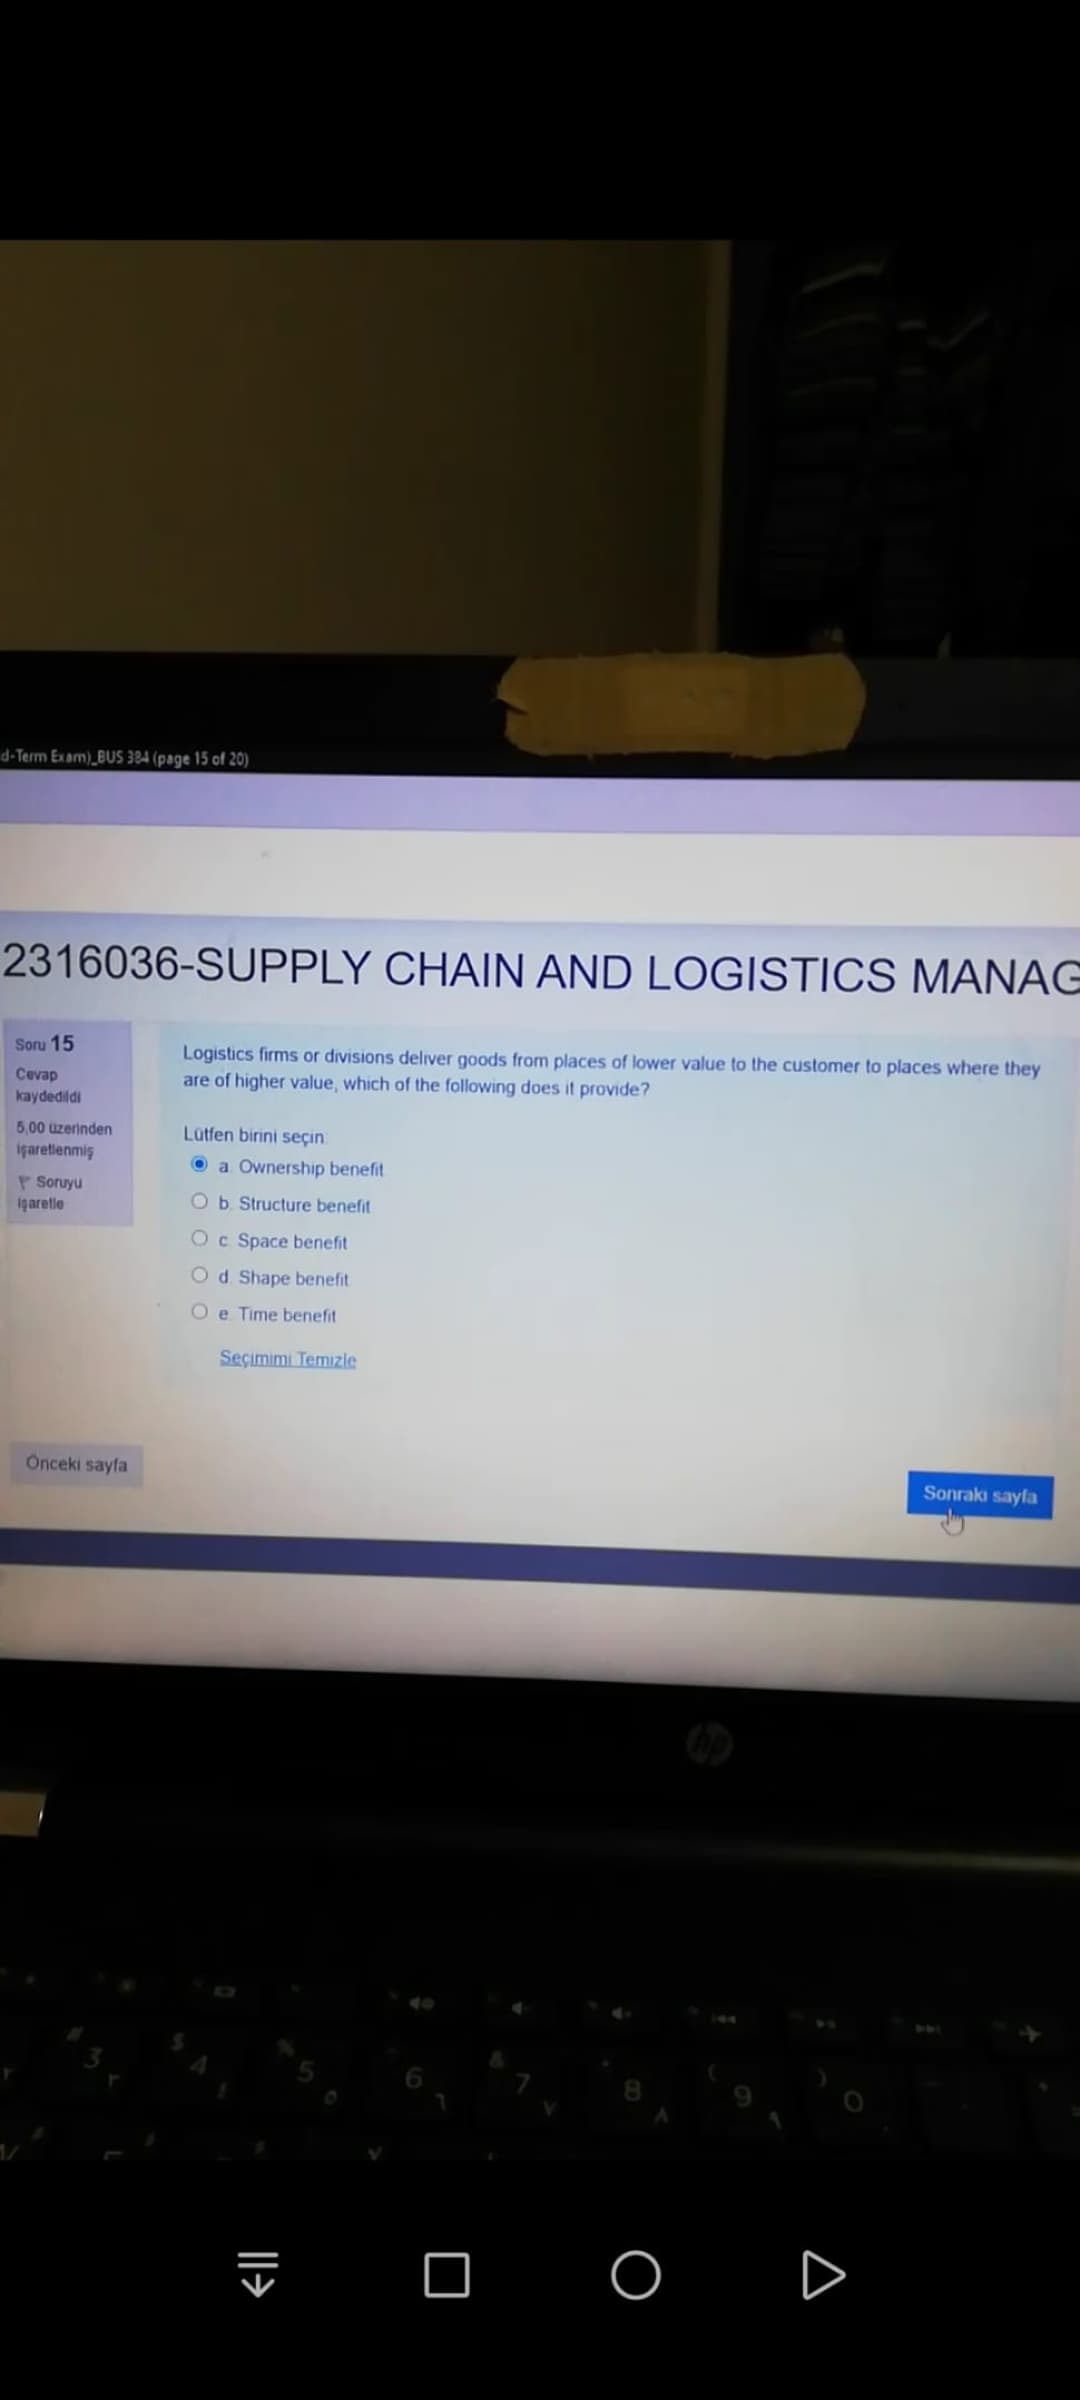 d-Term Exam)_BUS 384 (page 15 of 20)
2316036-SUPPLY CHAIN AND LOGISTICS MANAG
Soru 15
Logistics firms or divisions deliver goods from places of lower value to the customer to places where they
Cevap
are of higher value, which of the following does it provide?
kaydedildi
5,00 üzerinden
içaretlenmiş
Lütfen birini seçin
O a Ownership benefit
P Soruyu
igaretle
Ob Structure benefit
Oc Space benefit
Od Shape benefit
O e Time benefit
Seçimimi Temızle
Onceki sayfa
Sonraki sayfa
O O
||>
